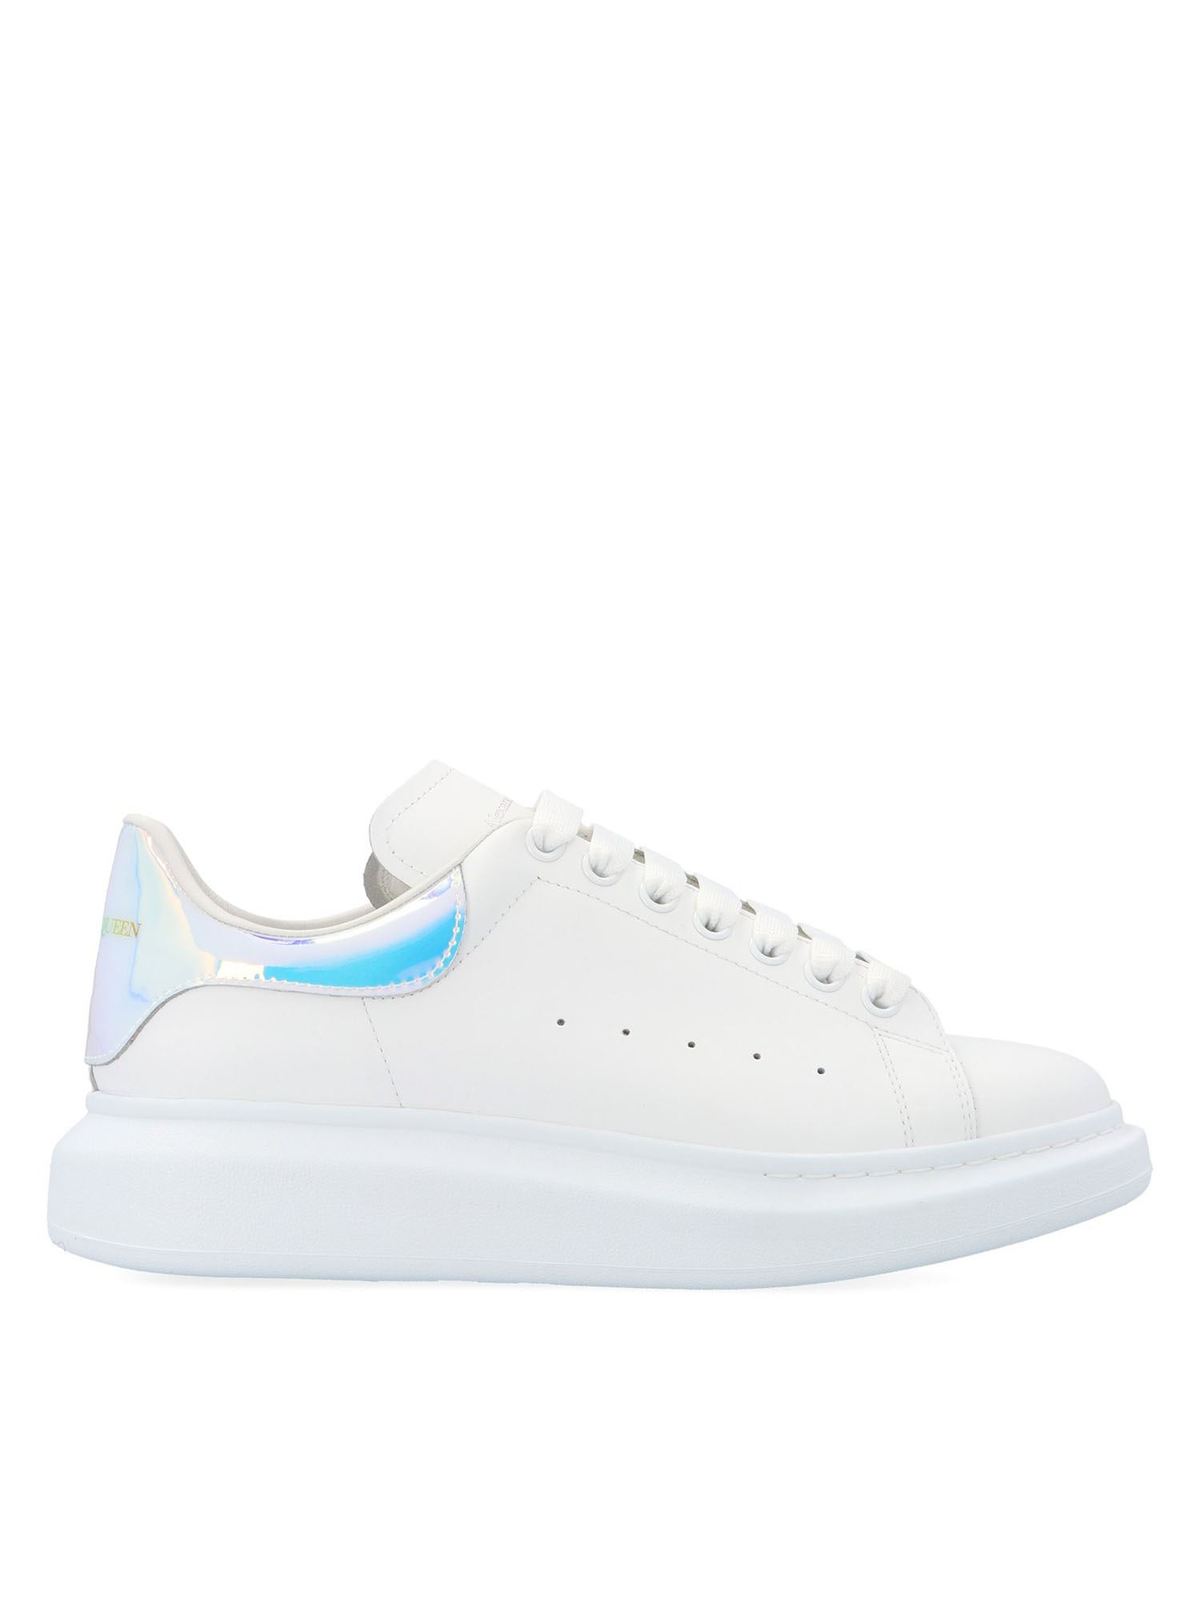 Alexander Mcqueen Oversize sneakers in white and holographic